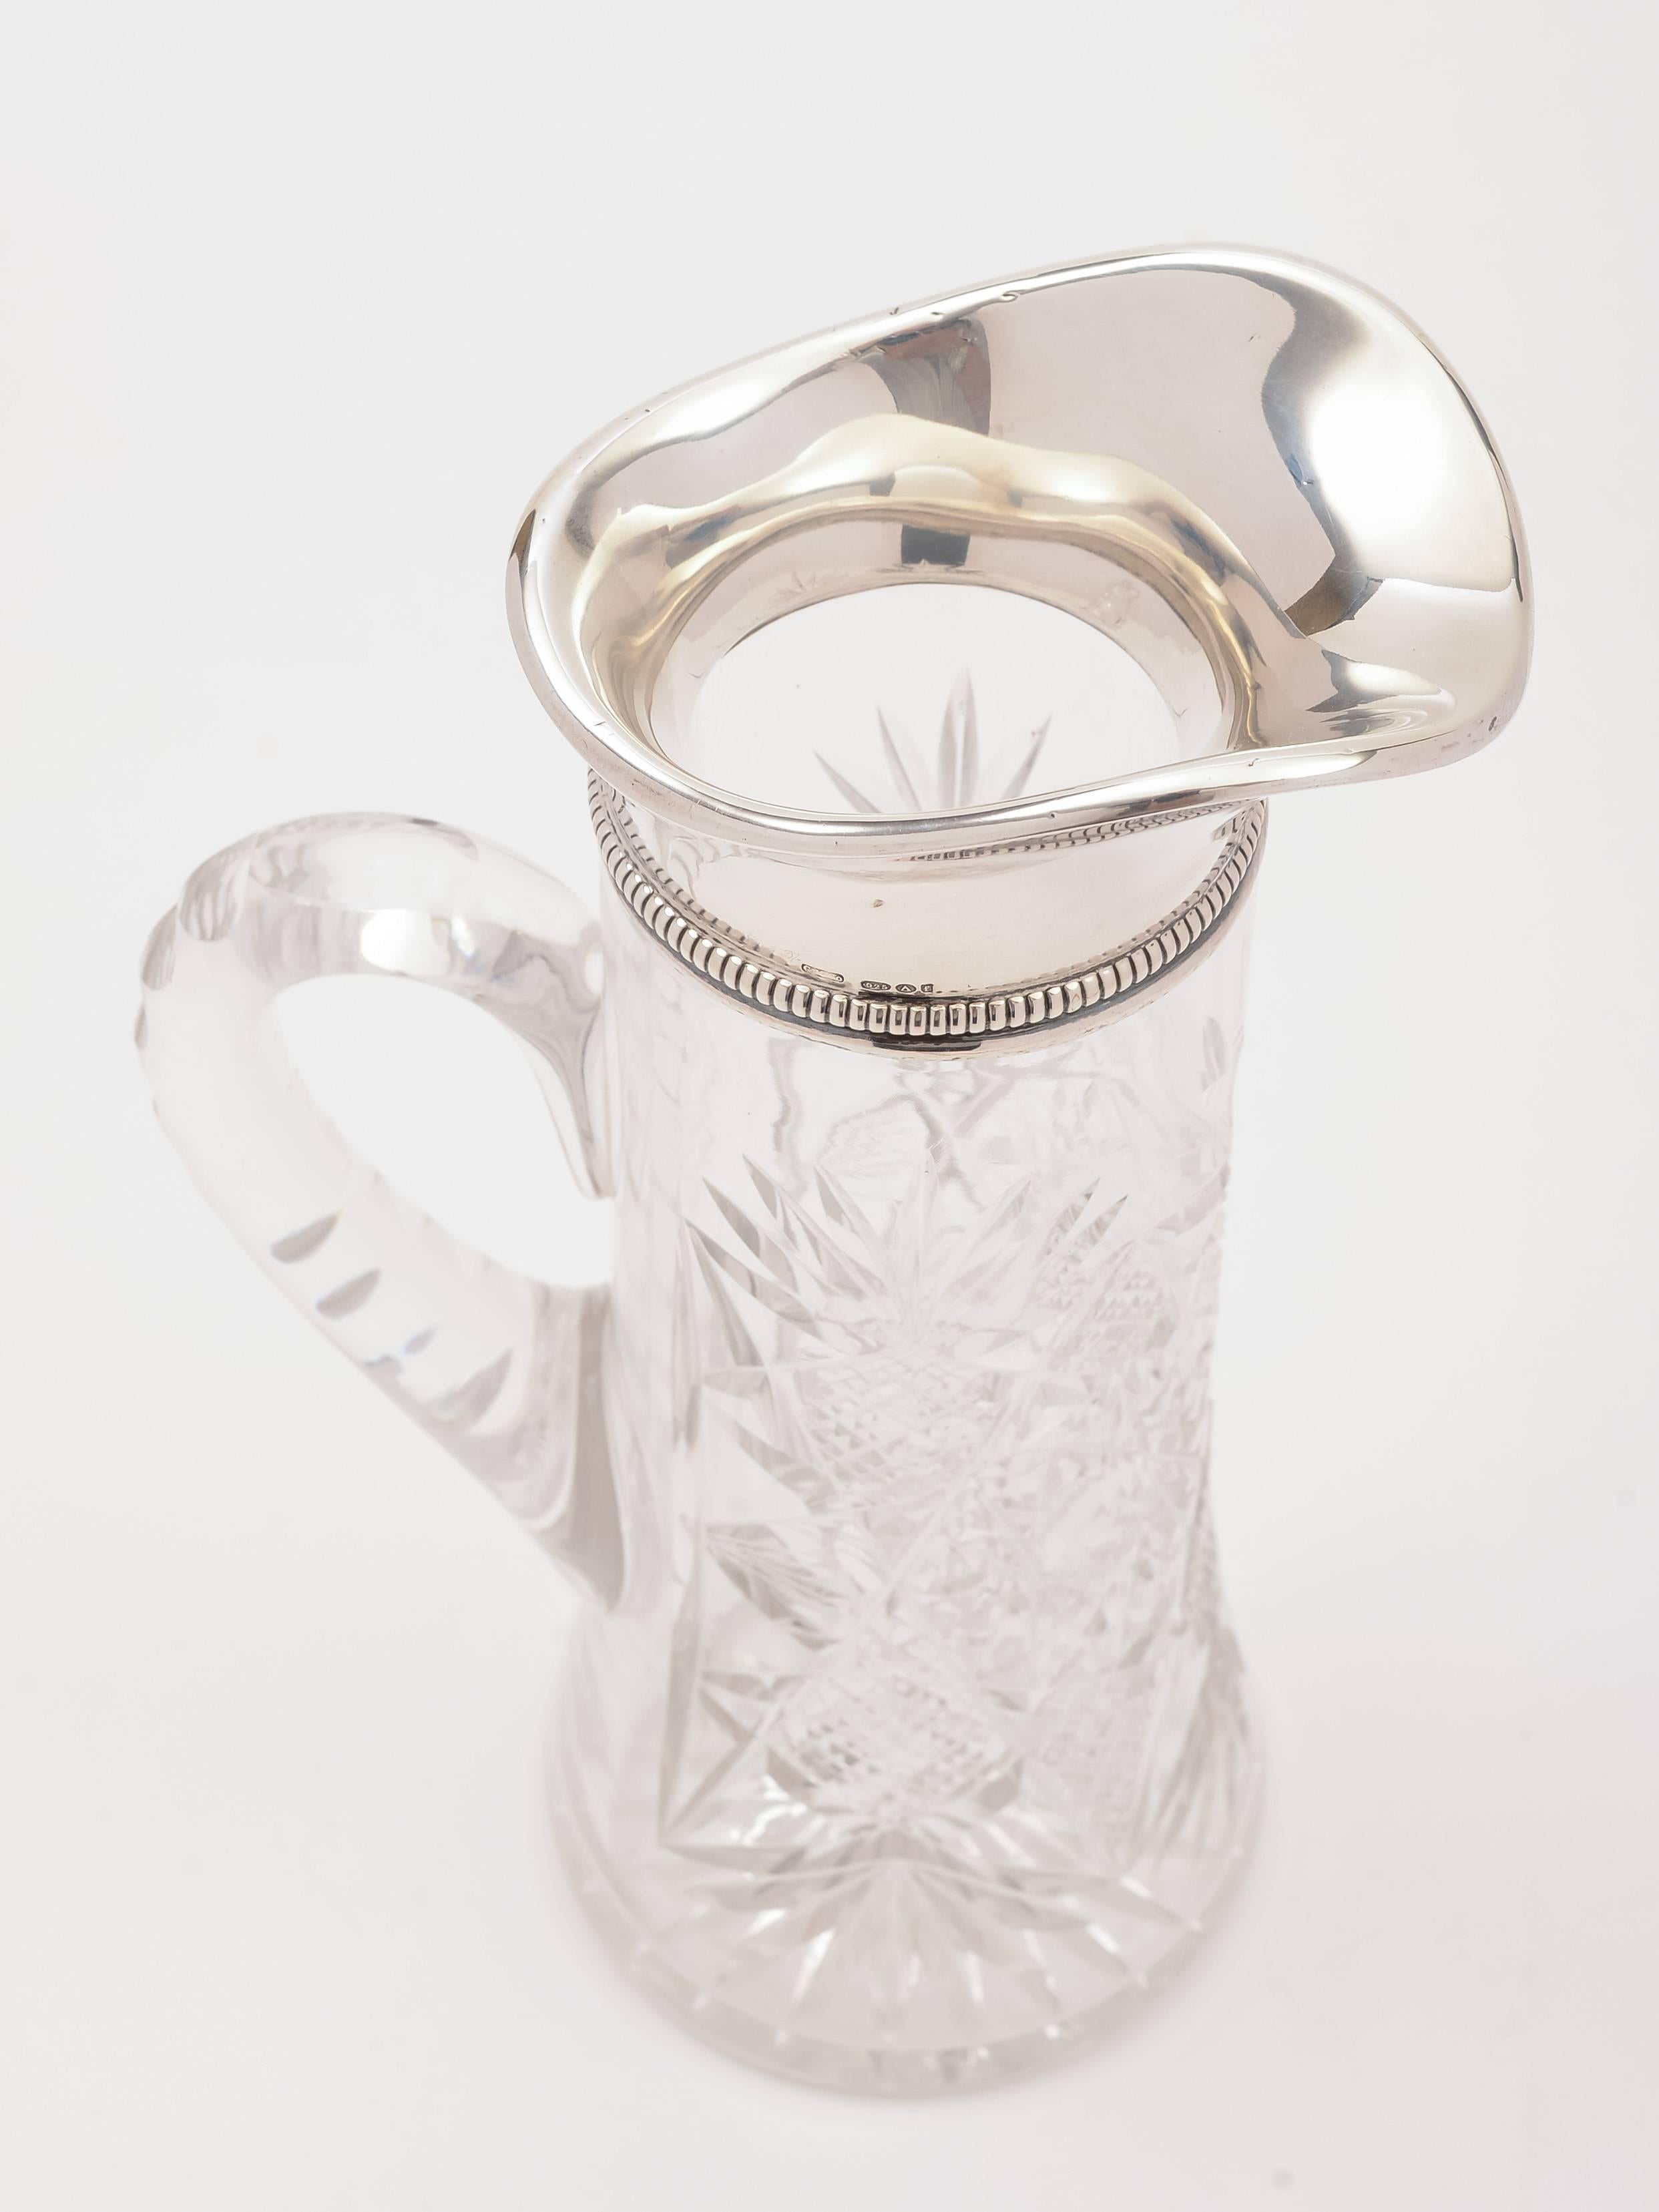 Edwardian American Silver Topped Jug or Pitcher, 1905 For Sale